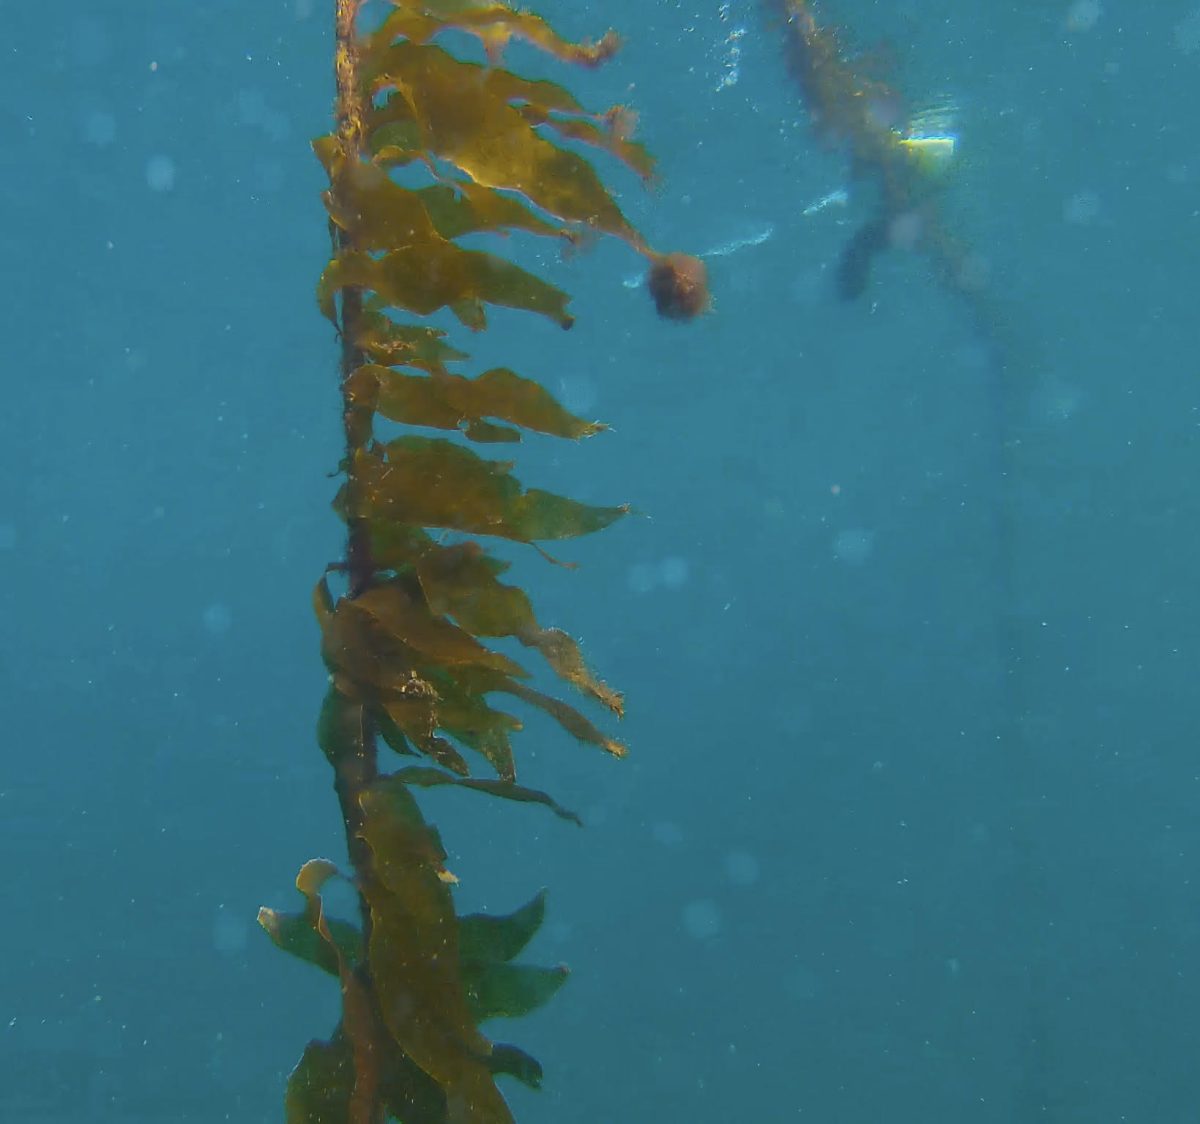 Fifty-six-day-old baby kelp growing on test lines in Twofold Bay NSW